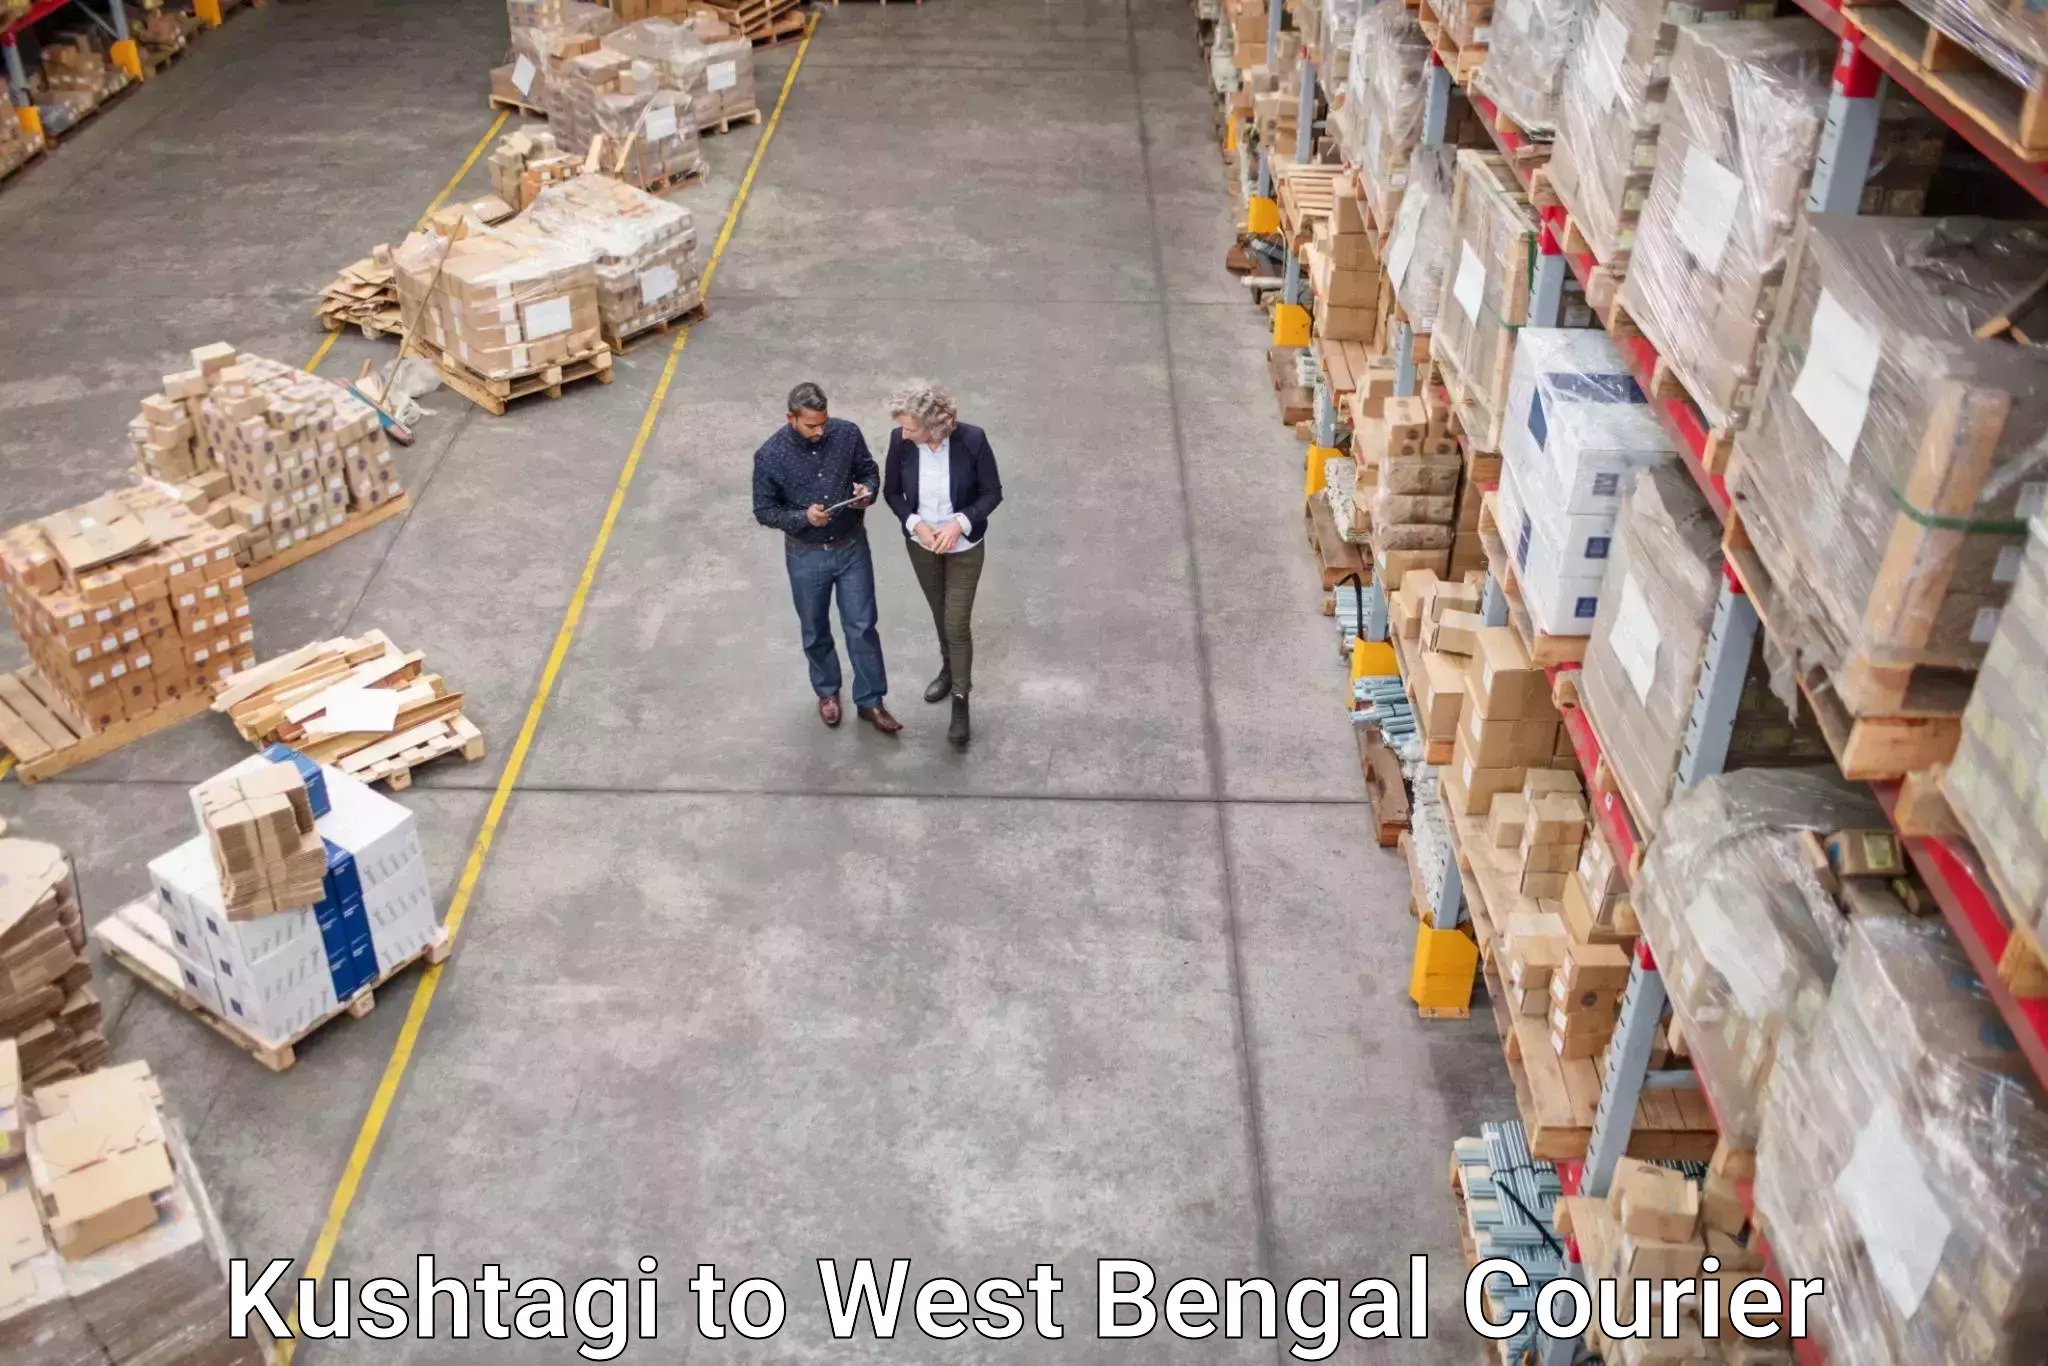 Easy access courier services in Kushtagi to Kalyani